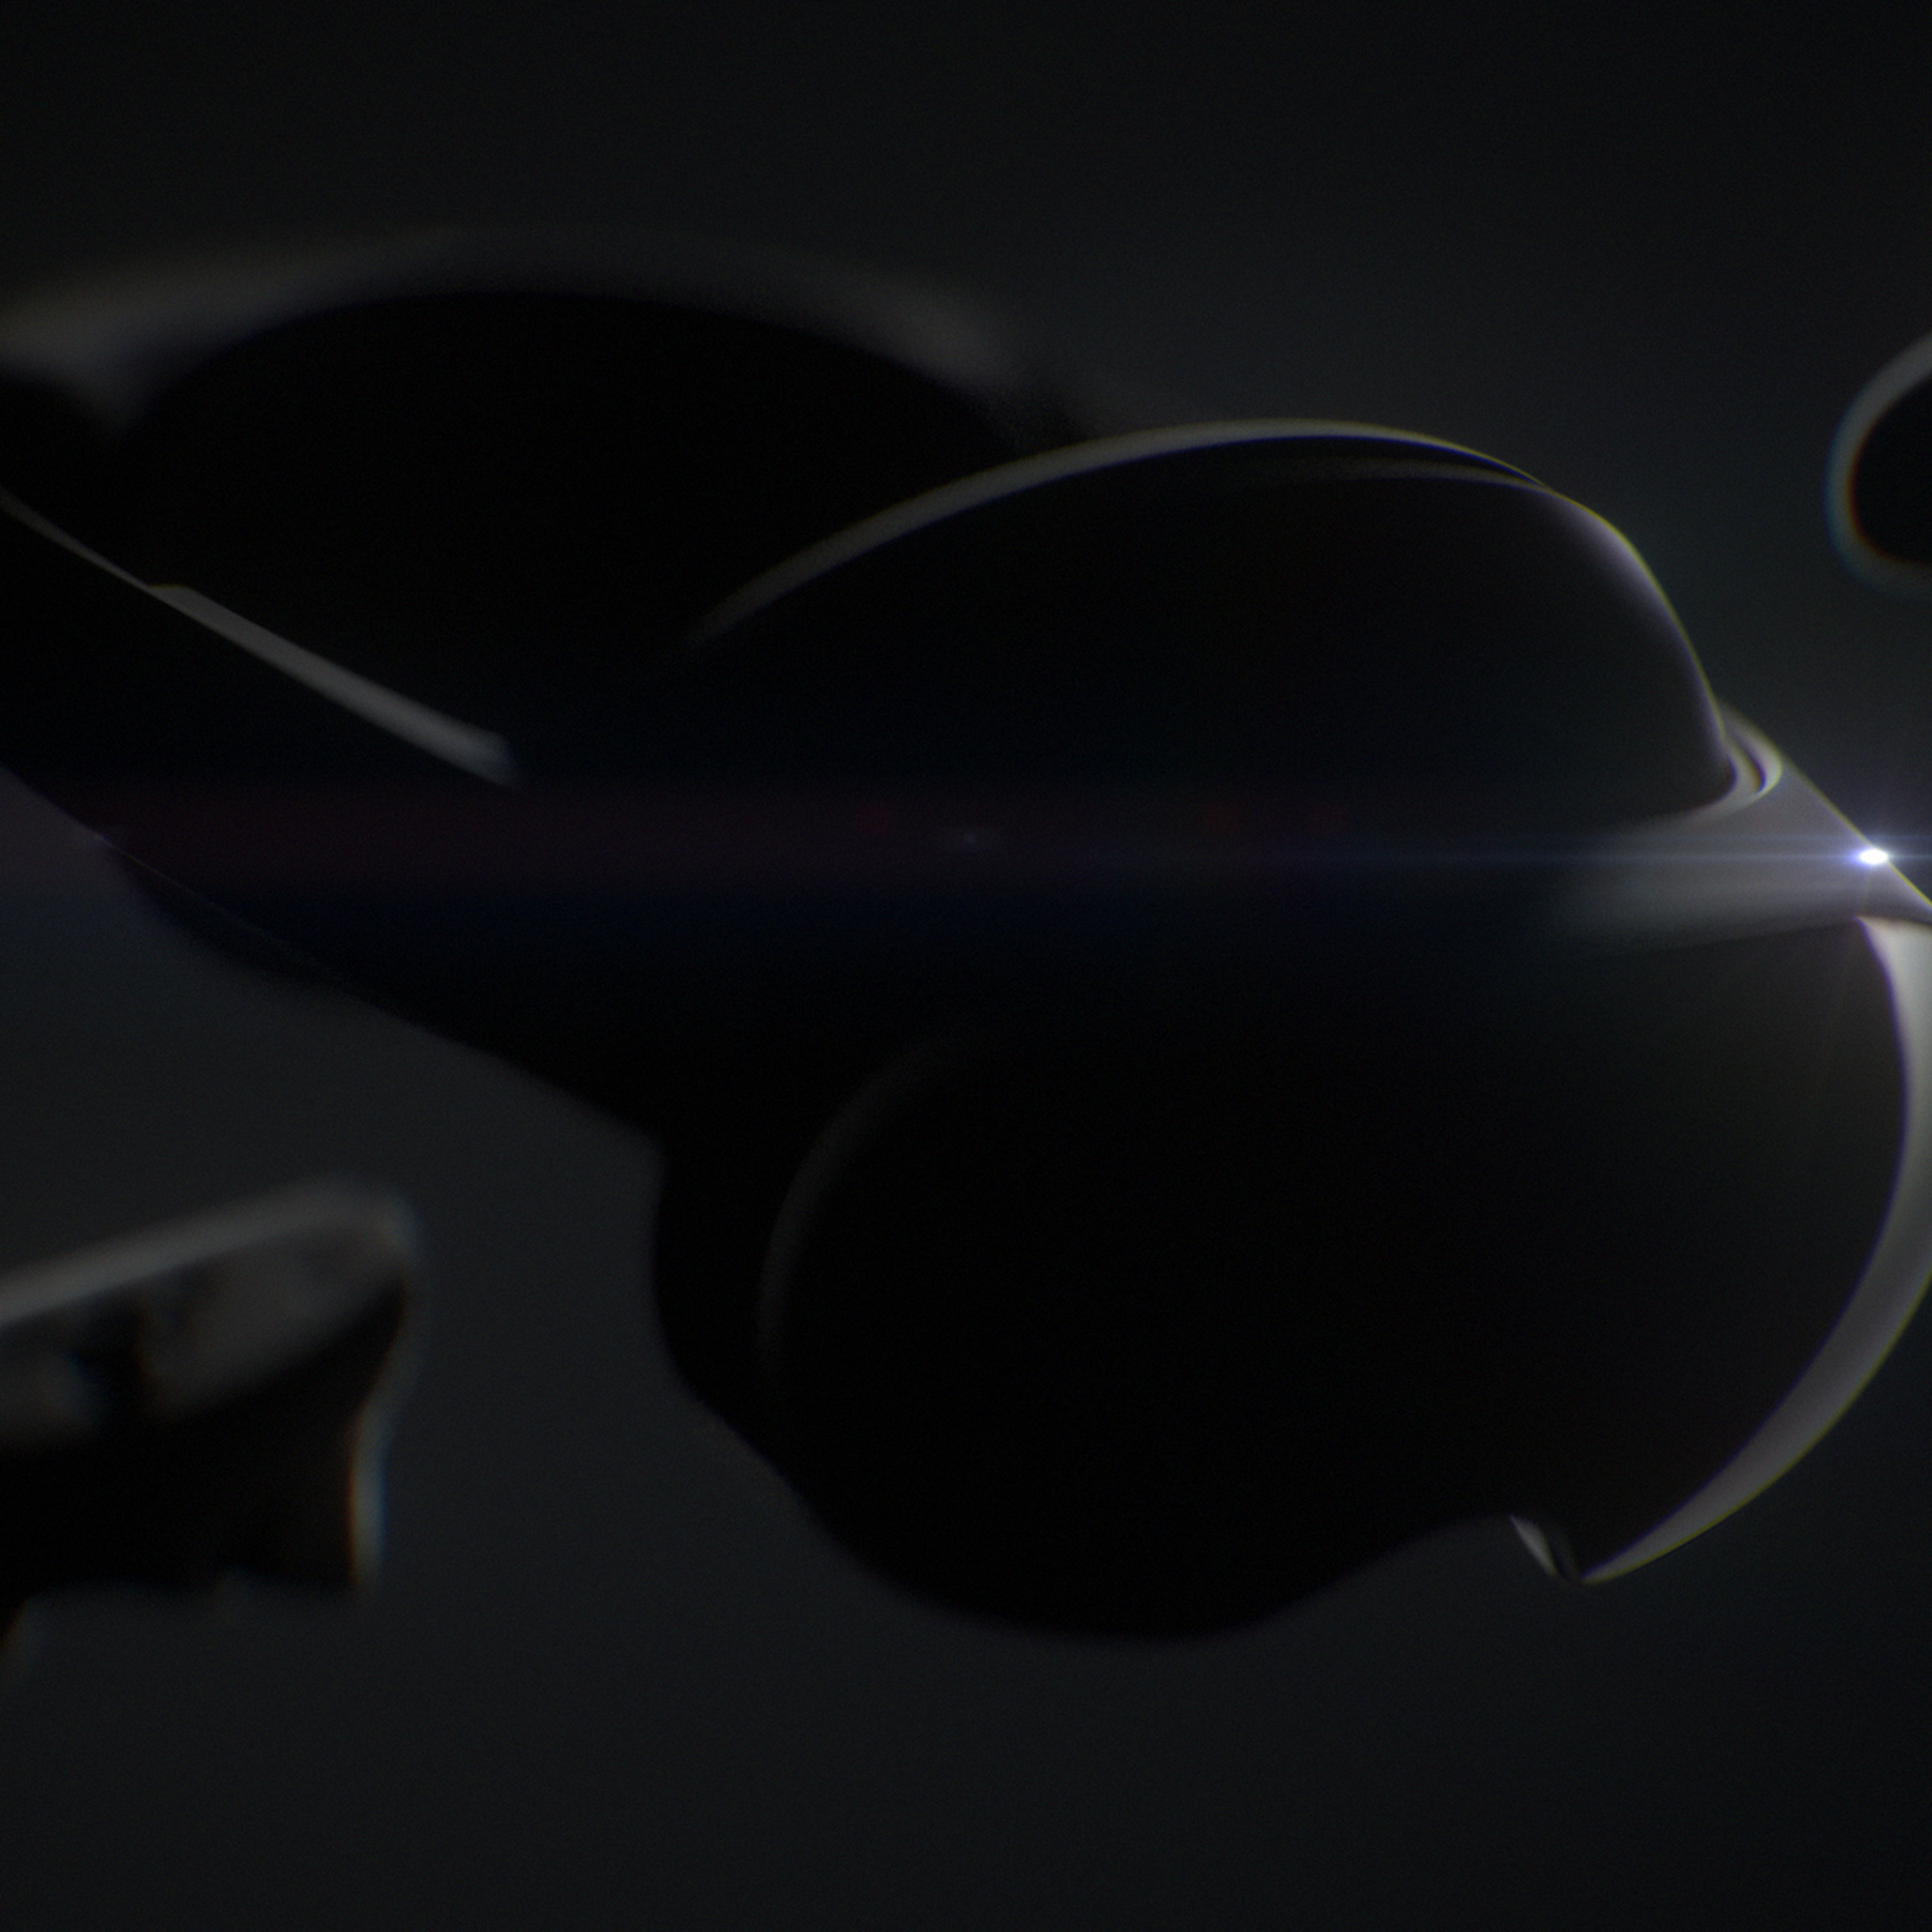 Teaser image of the Project Cambria headset